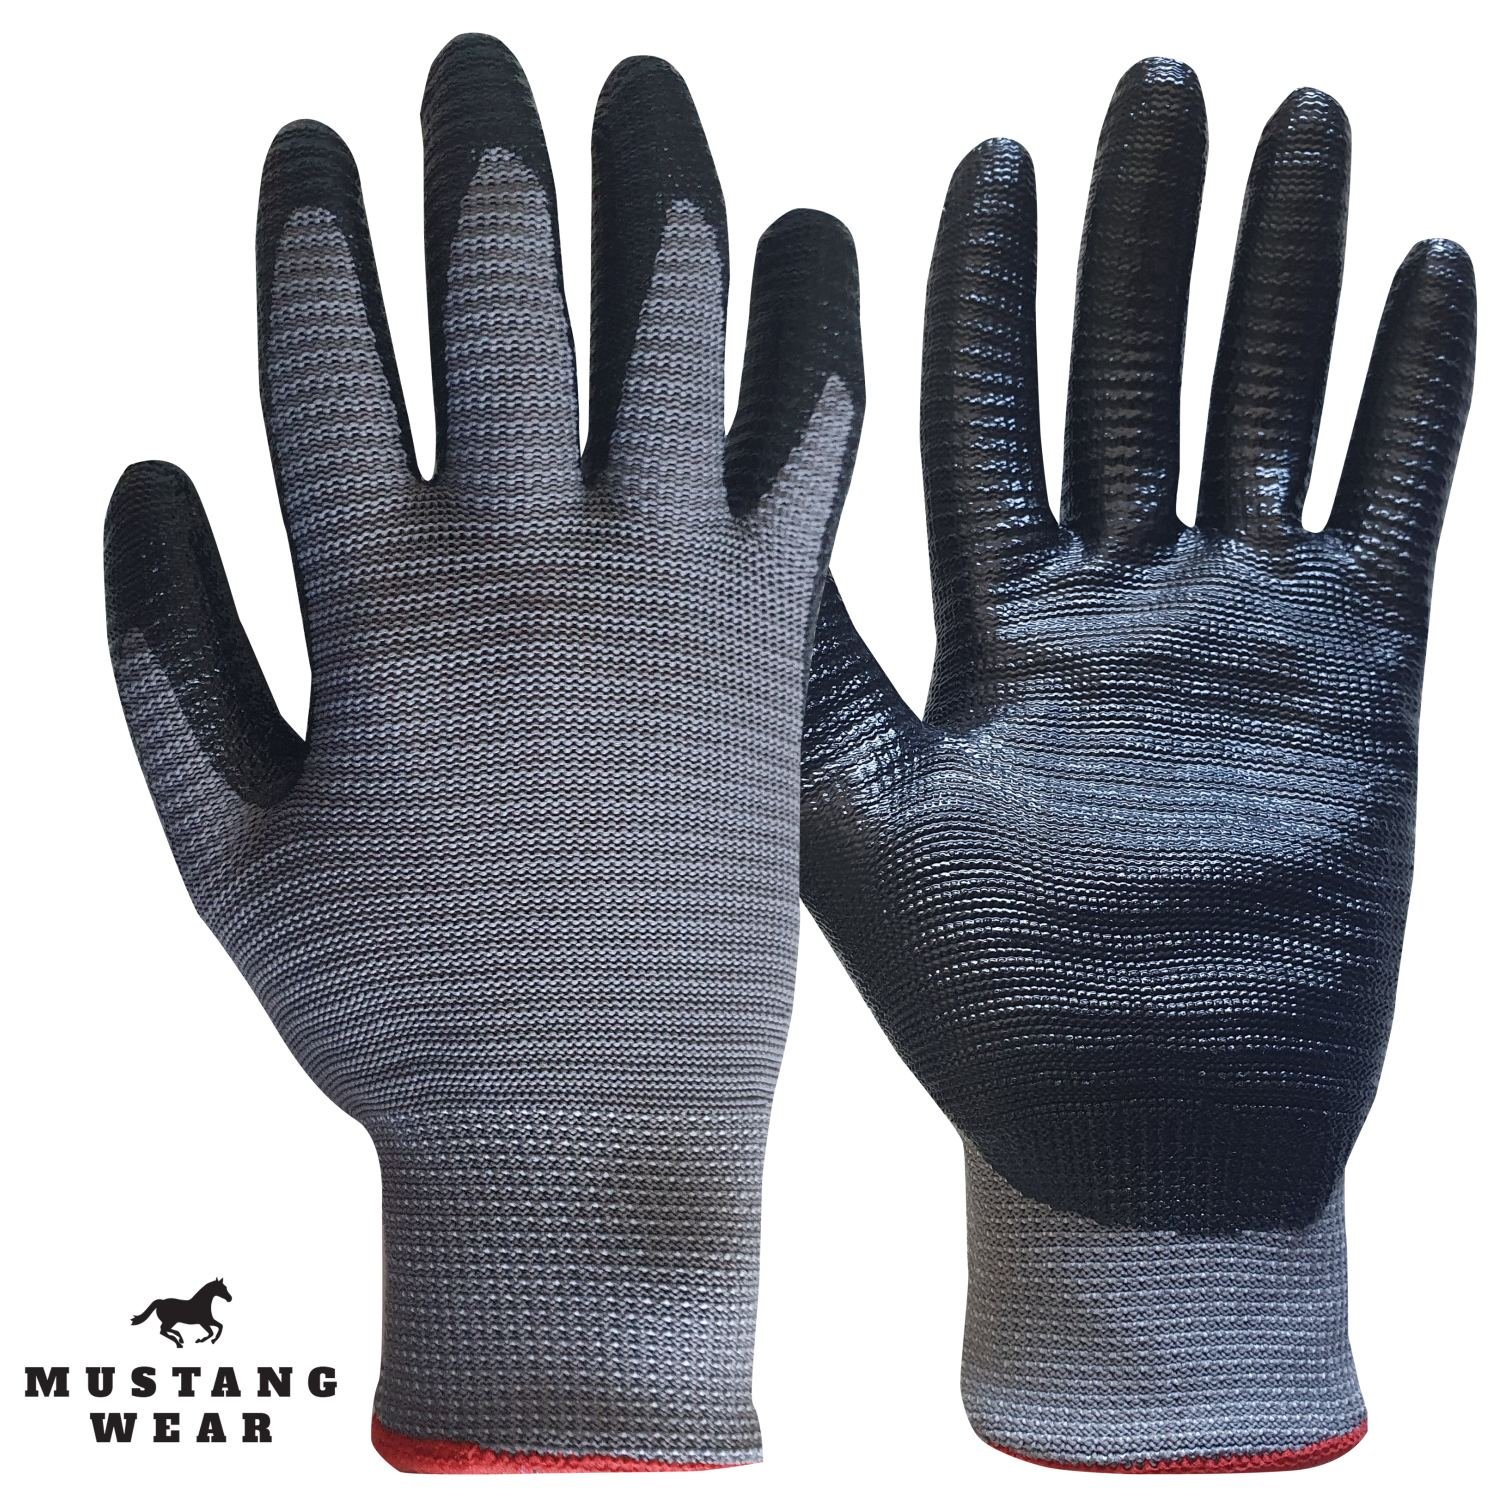 Mustang Wear SuperGrip Corrugated Nitrile Palm Glove